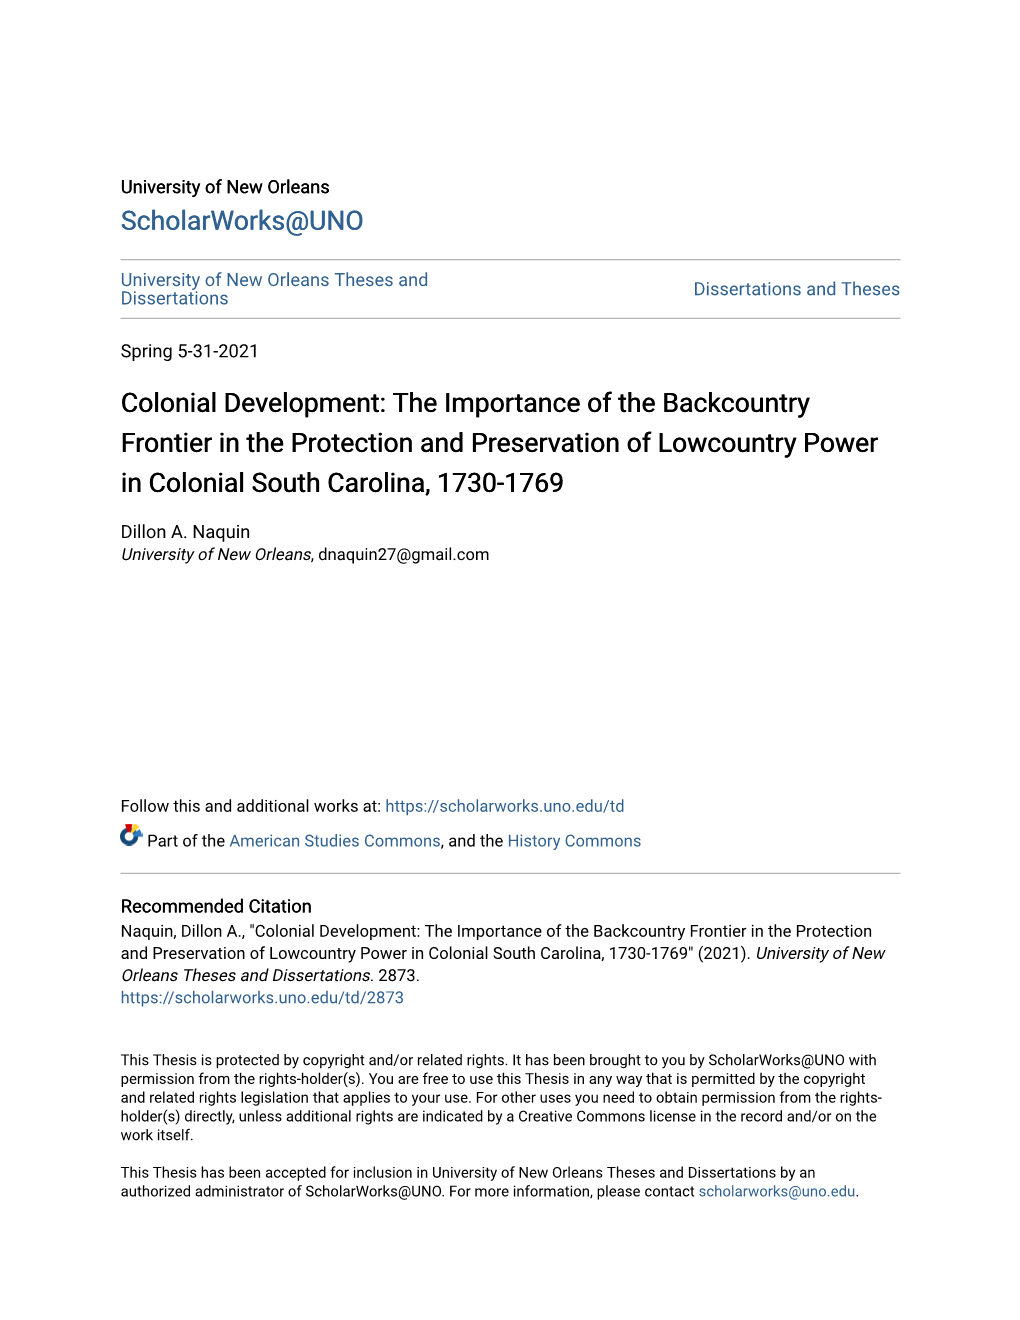 Colonial Development: the Importance of the Backcountry Frontier in the Protection and Preservation of Lowcountry Power in Colonial South Carolina, 1730-1769